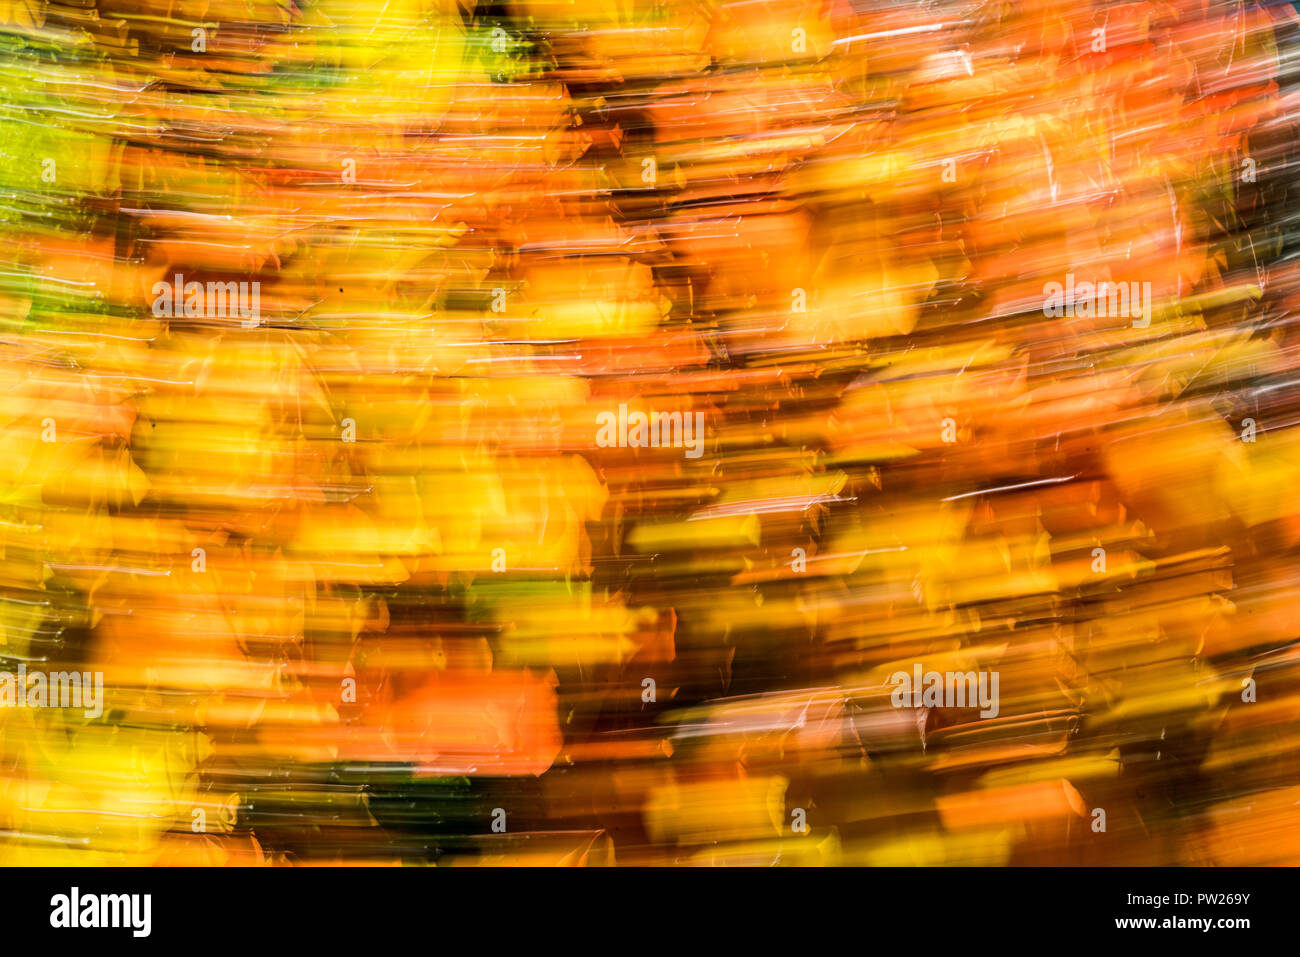 Abstract horizontal image of fall foliage in a swirl of brilliant color Stock Photo